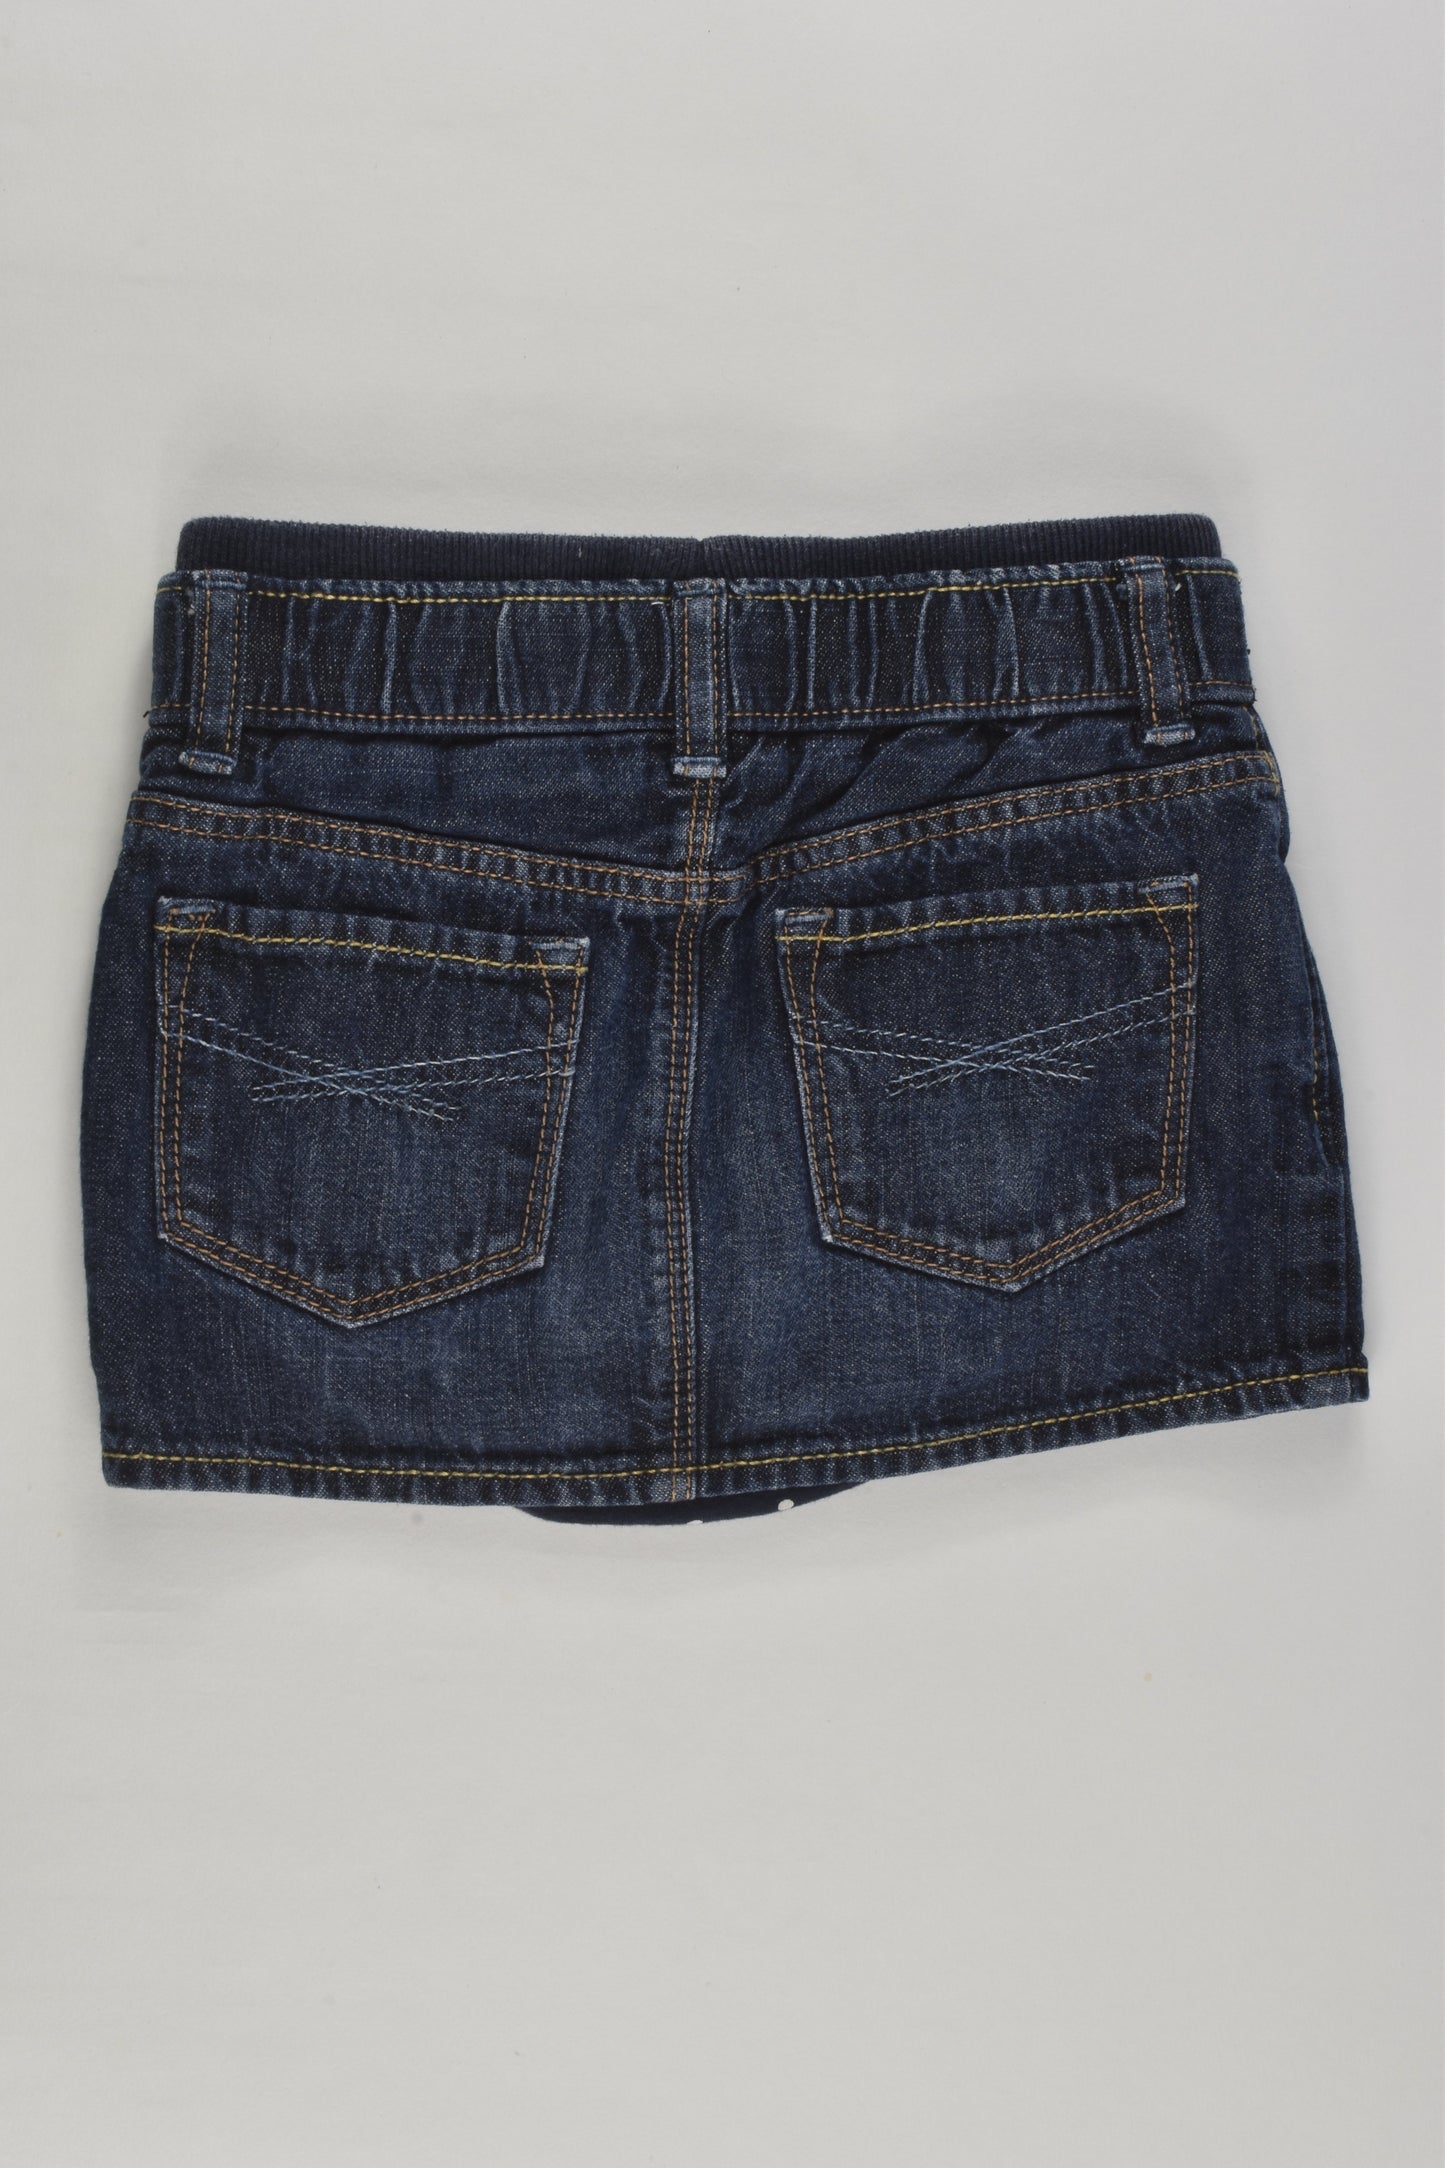 Baby Gap Size 1 (12-18 months) Denim Skirt with Nappy Cover Underneath